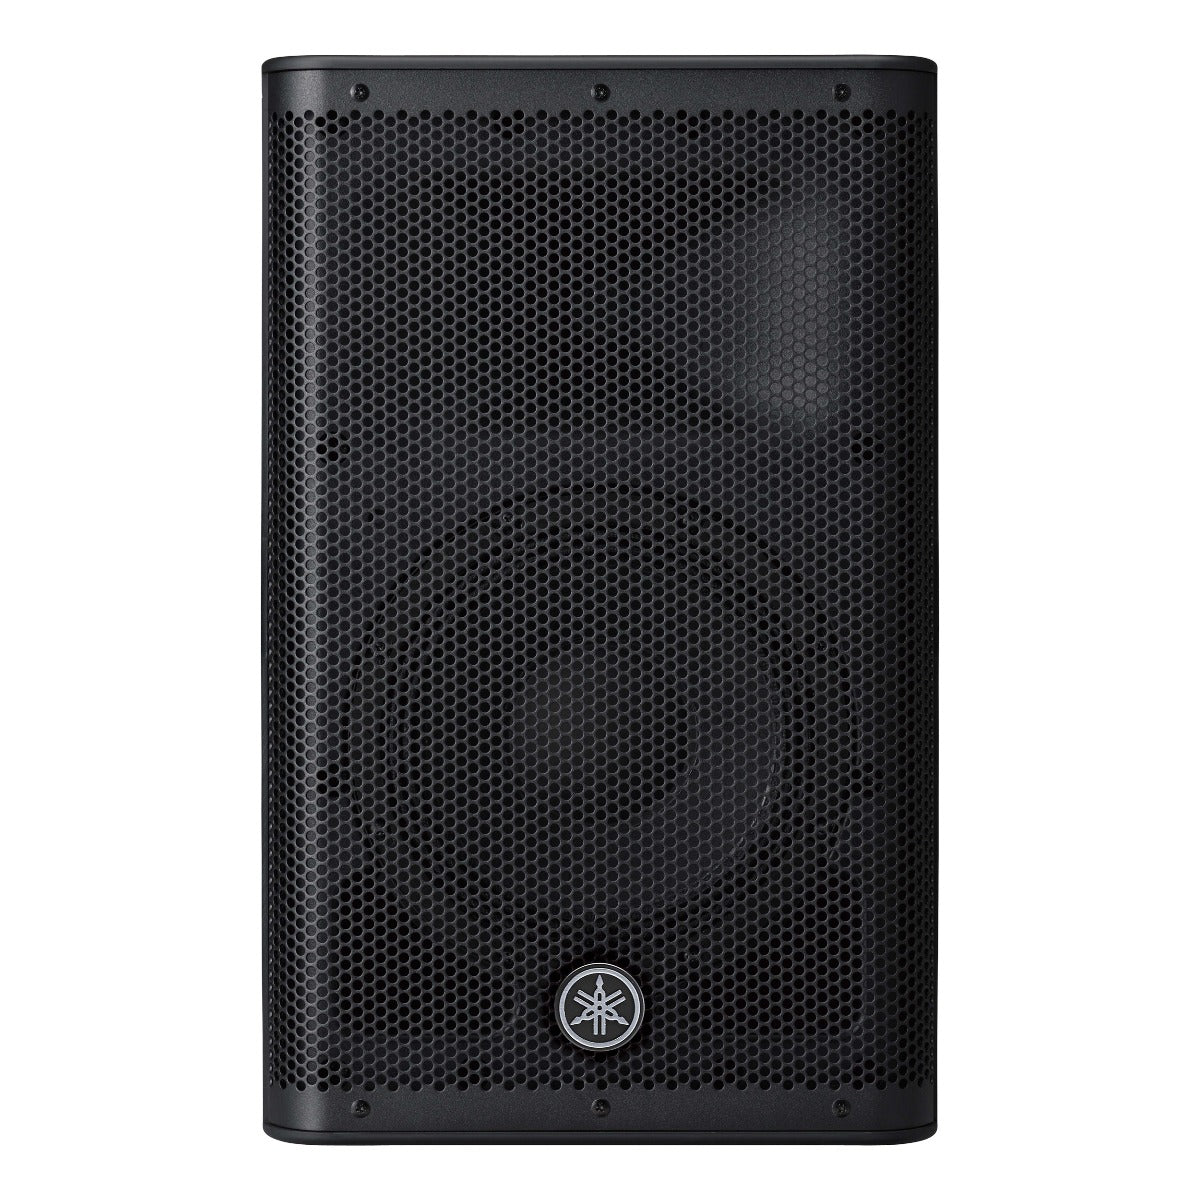 Image of the Yamaha DXR10 MKII Powered PA Speaker front view